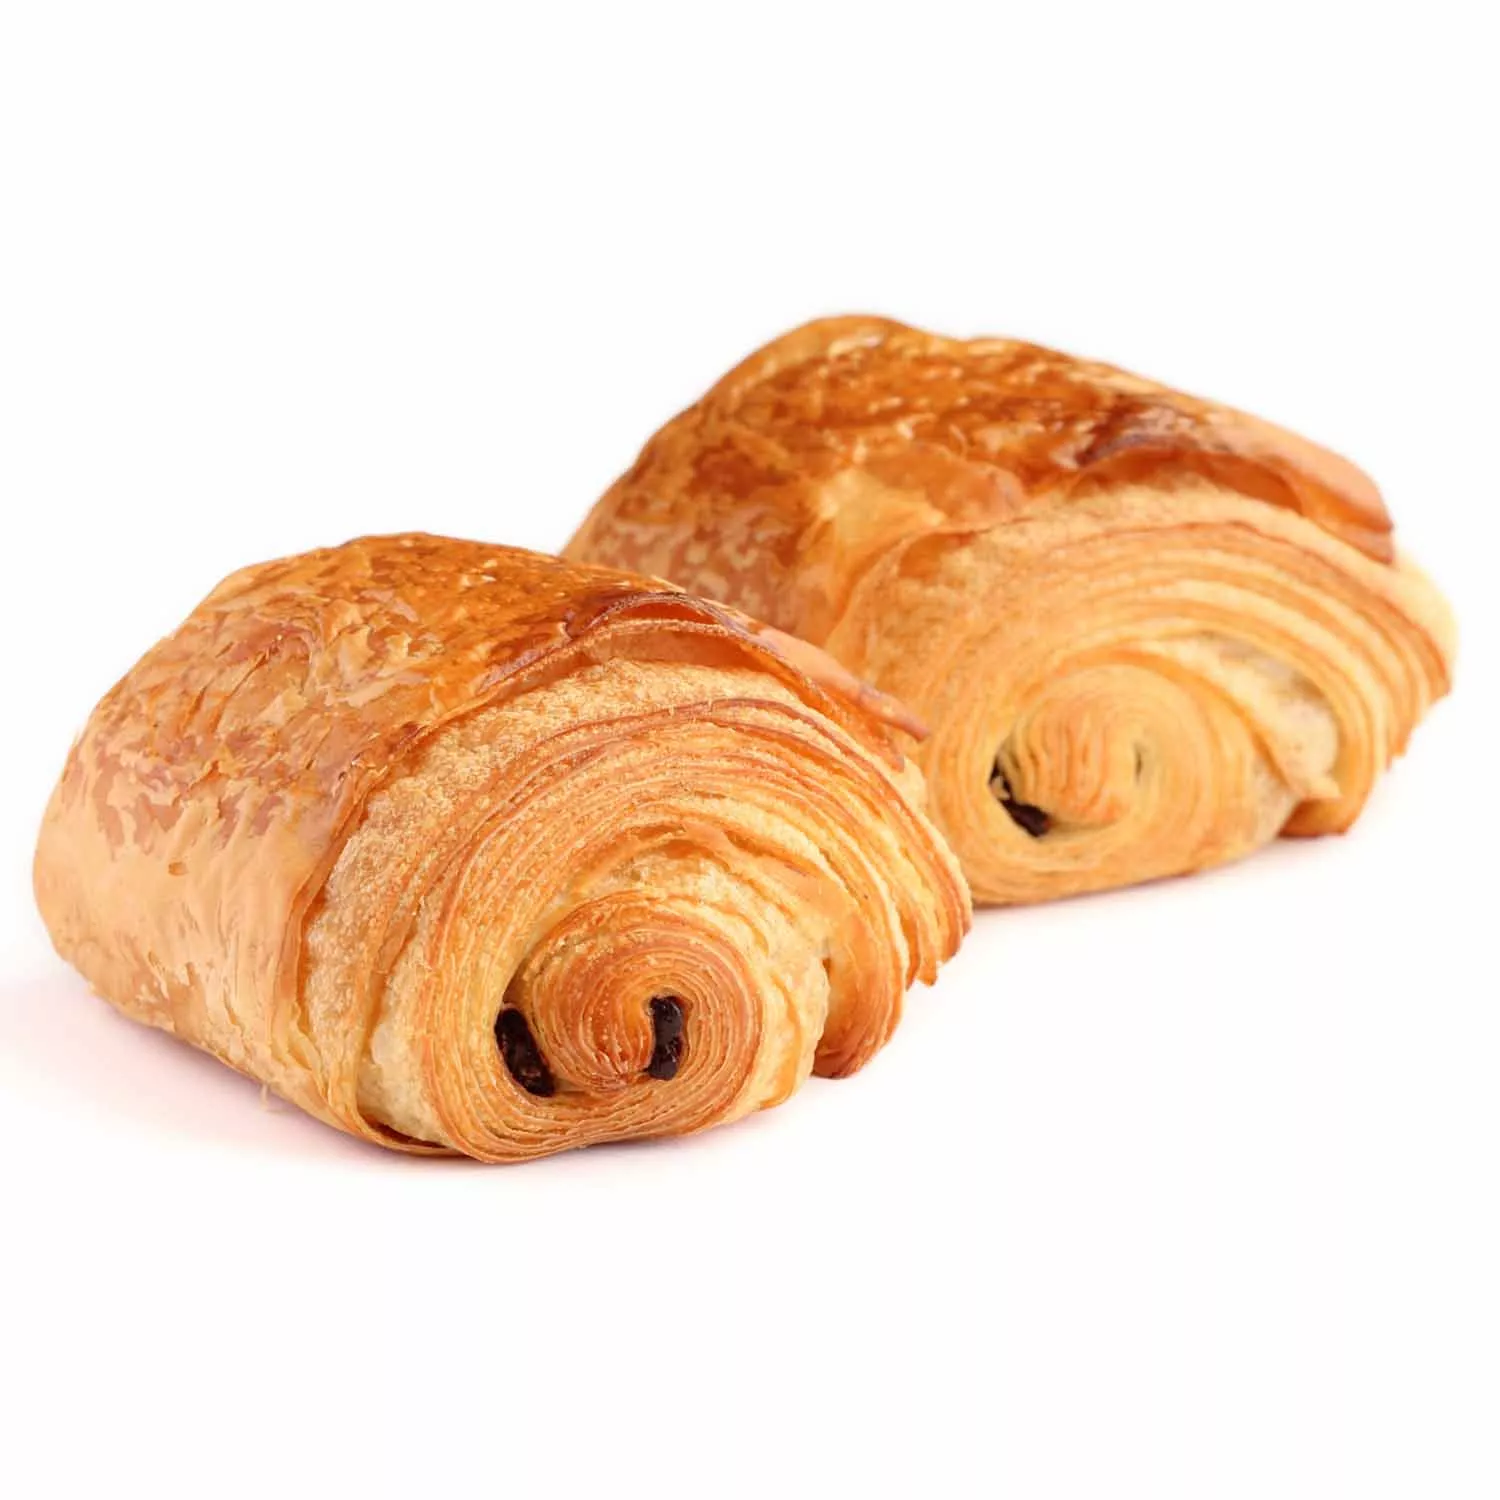 Choice Single Stainless Steel Croissant / Pastry Cutter with Wood Handles  for 7 3/4 x 7 Croissants